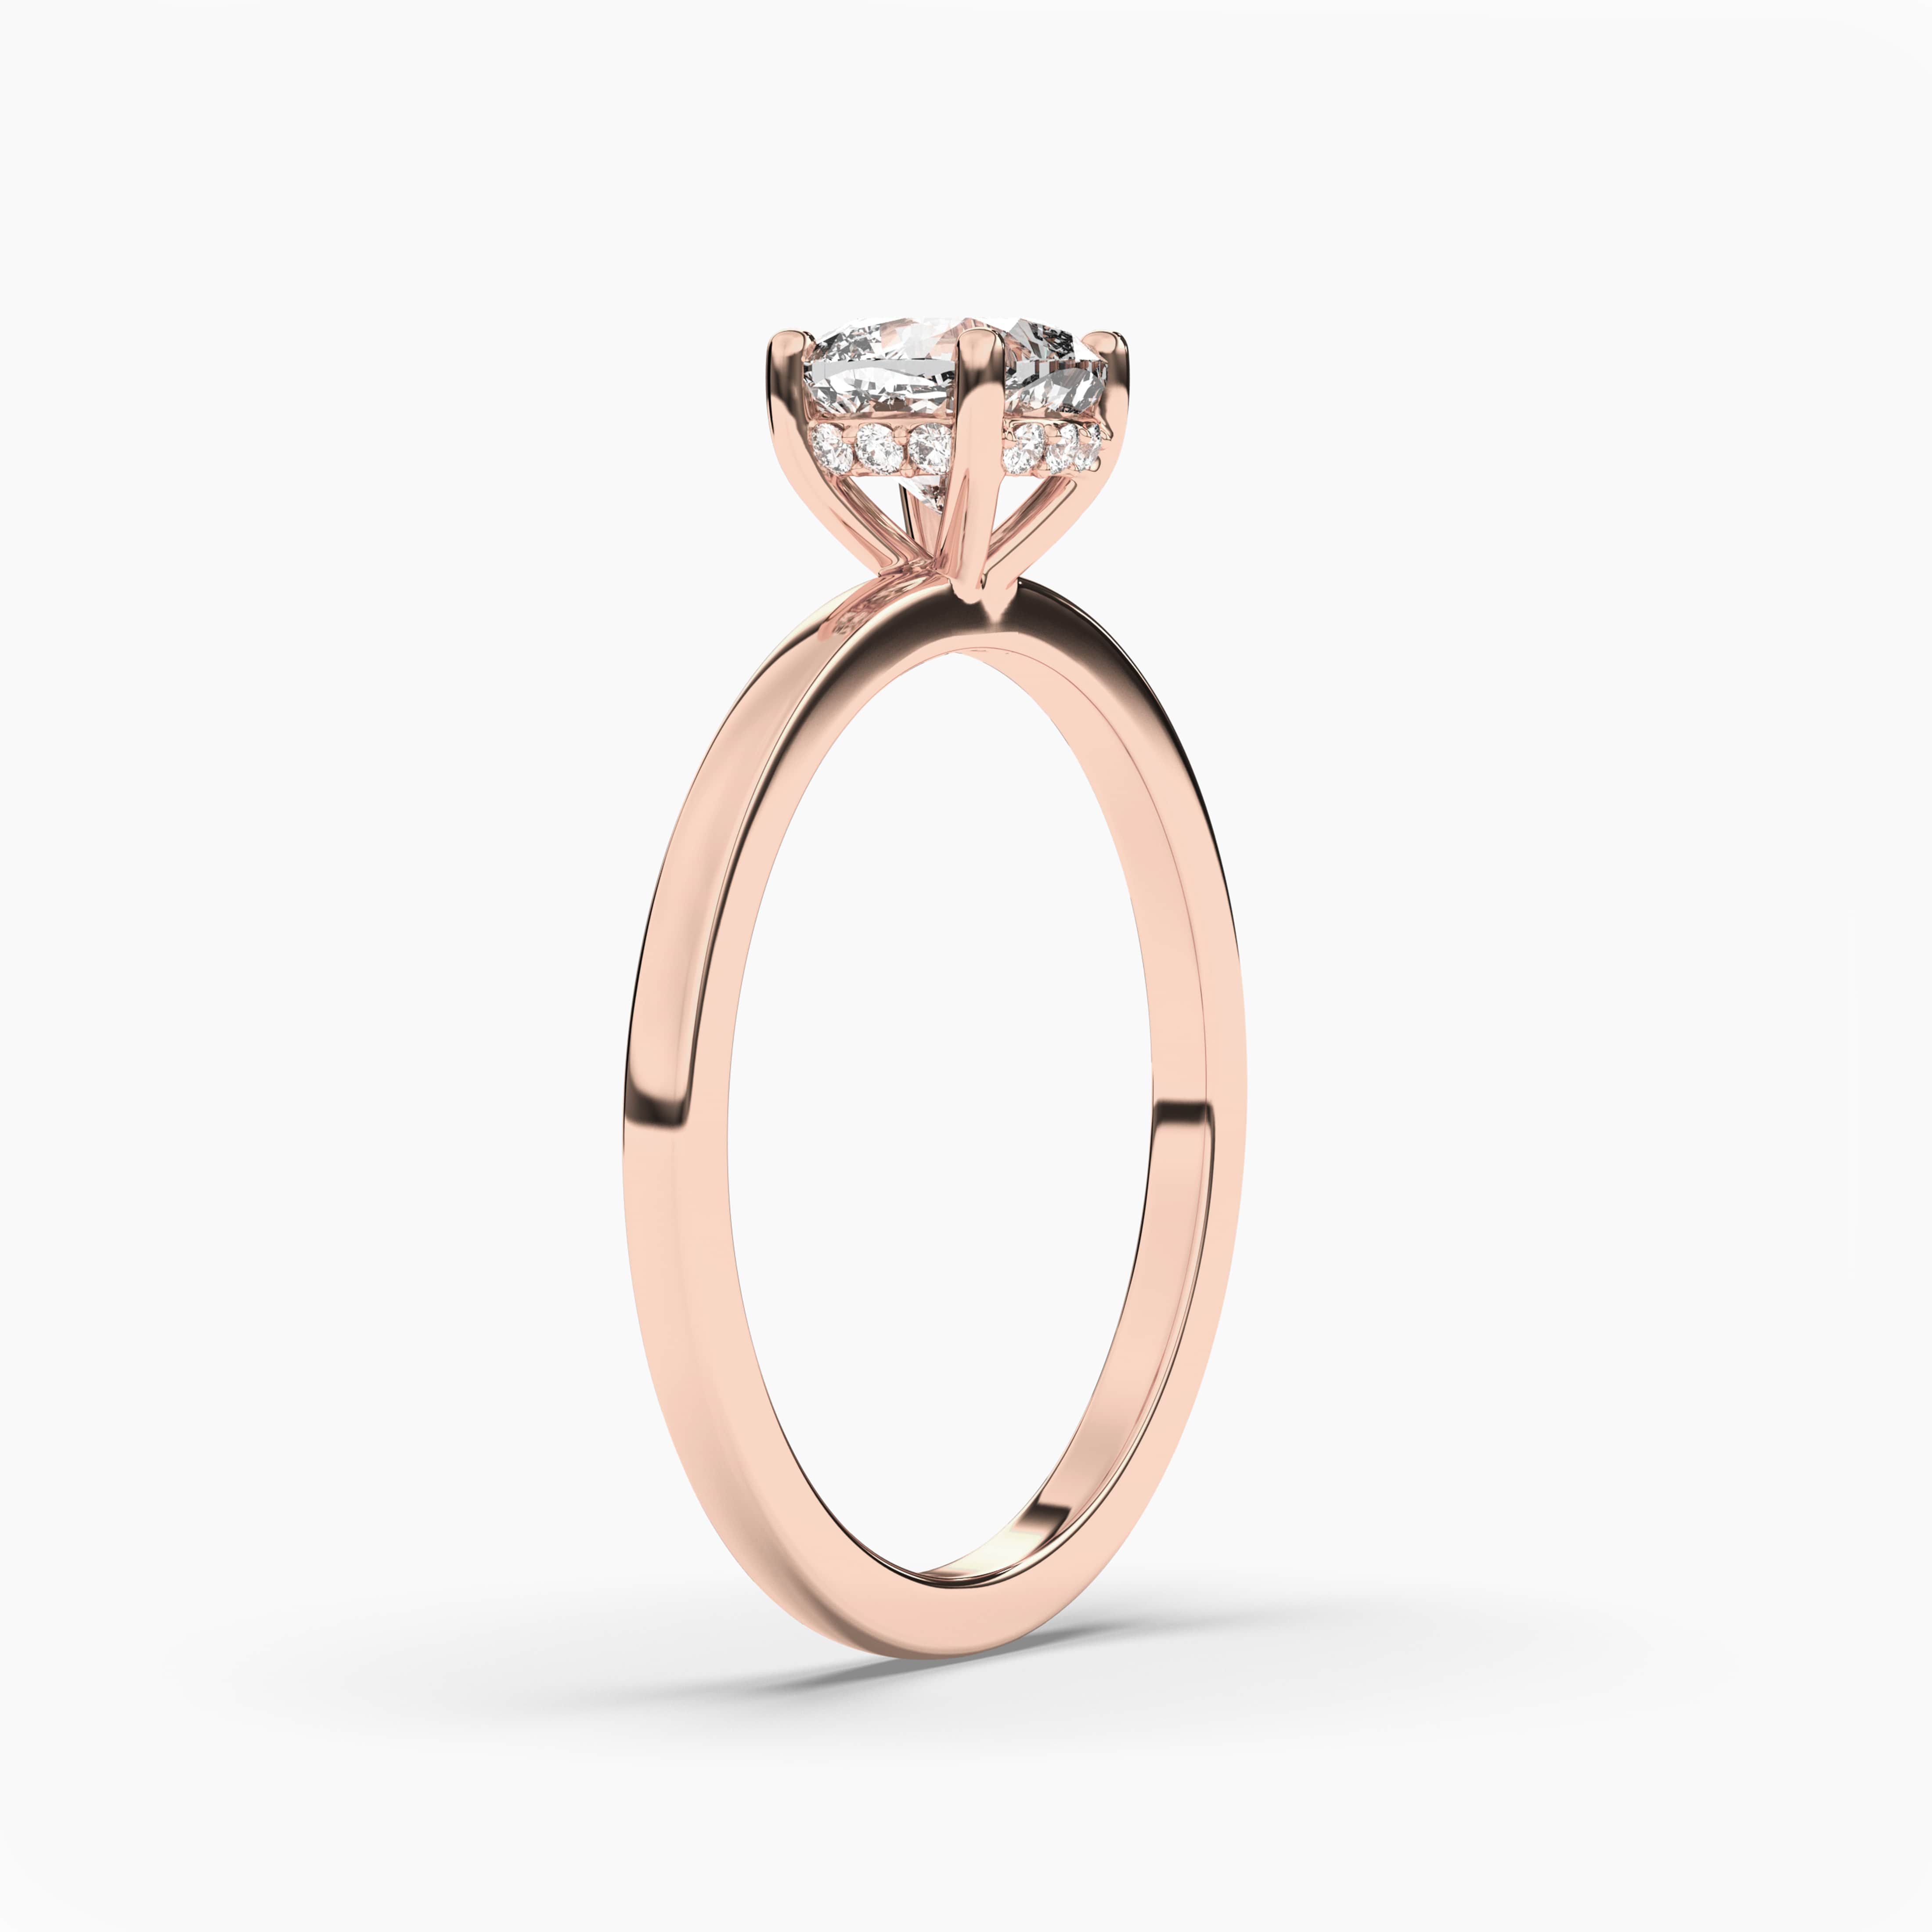  cushion cut hidden halo engagement ring in rose gold